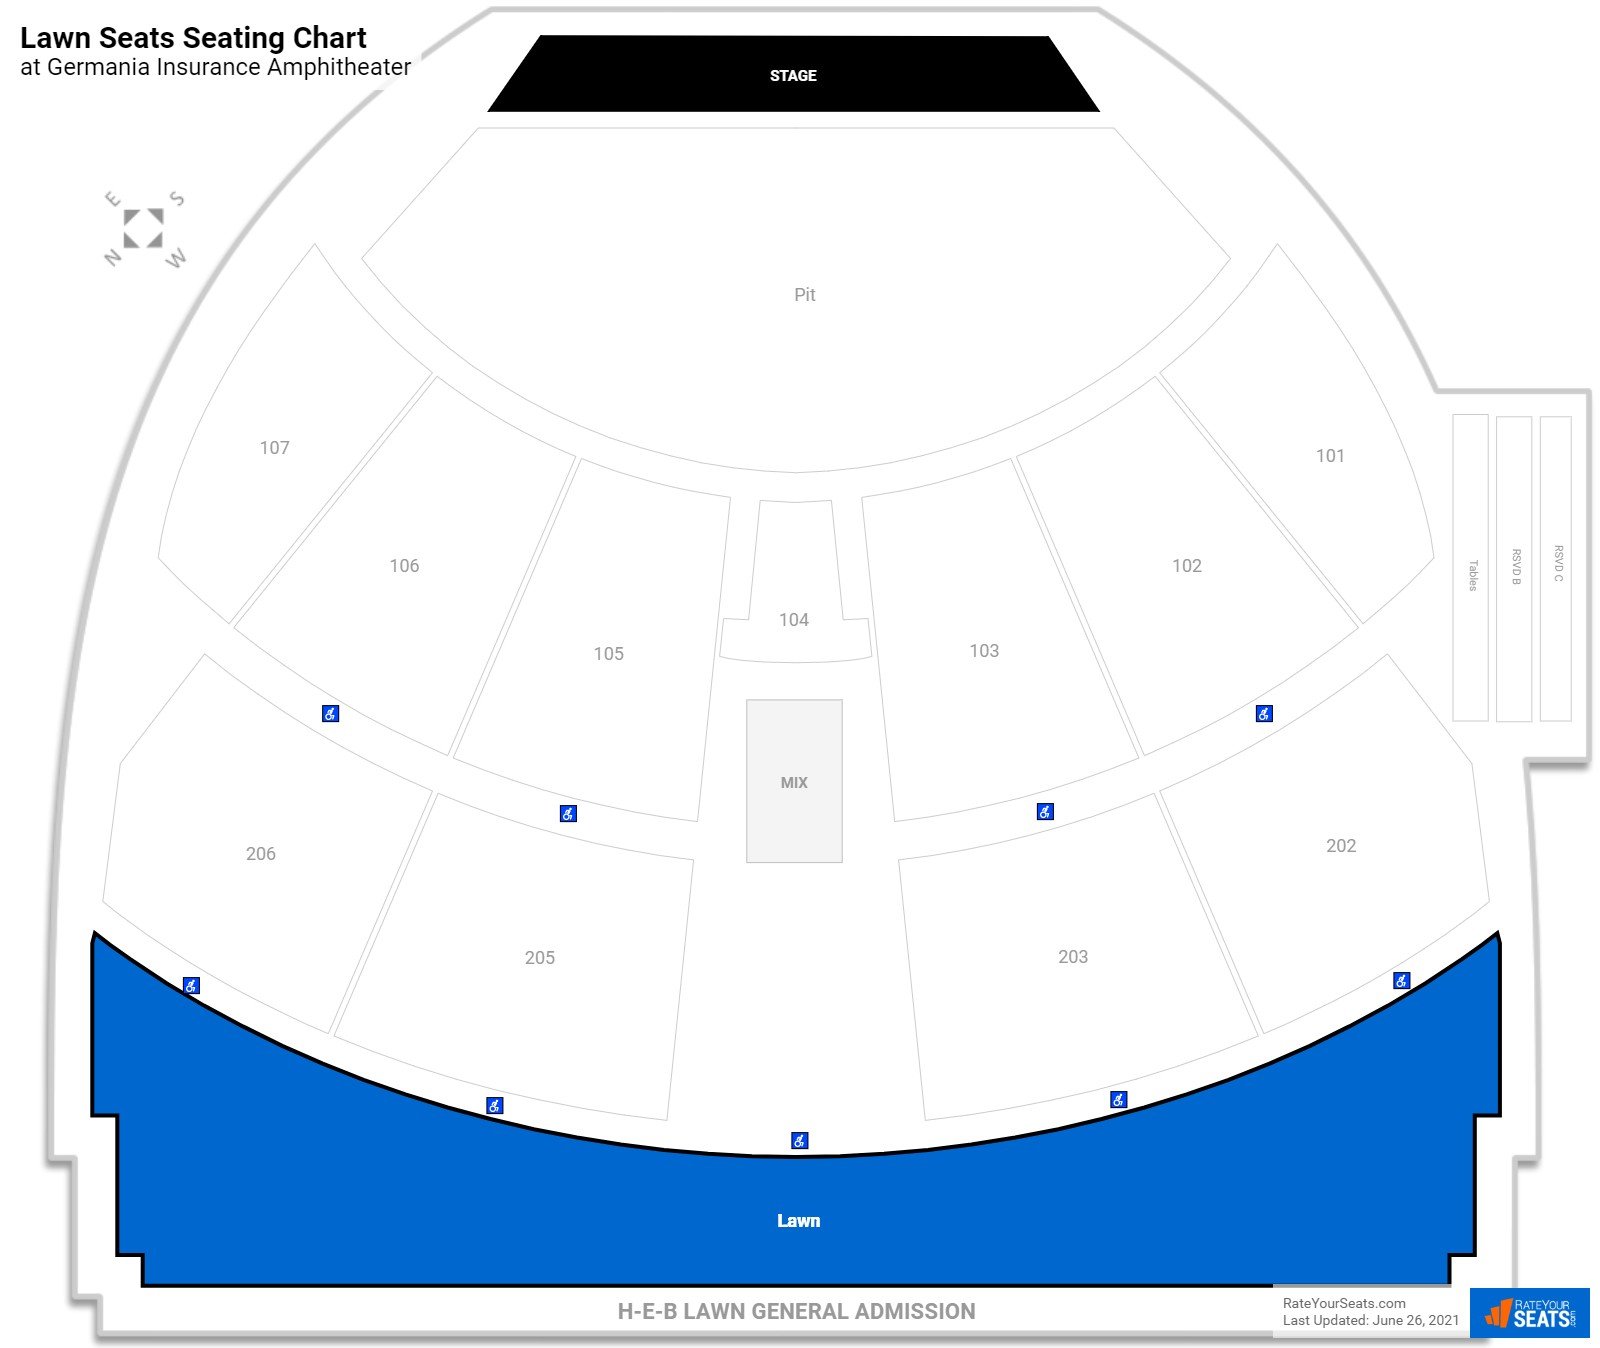 Concert Lawn Seats Seating Chart at Germania Insurance Amphitheater